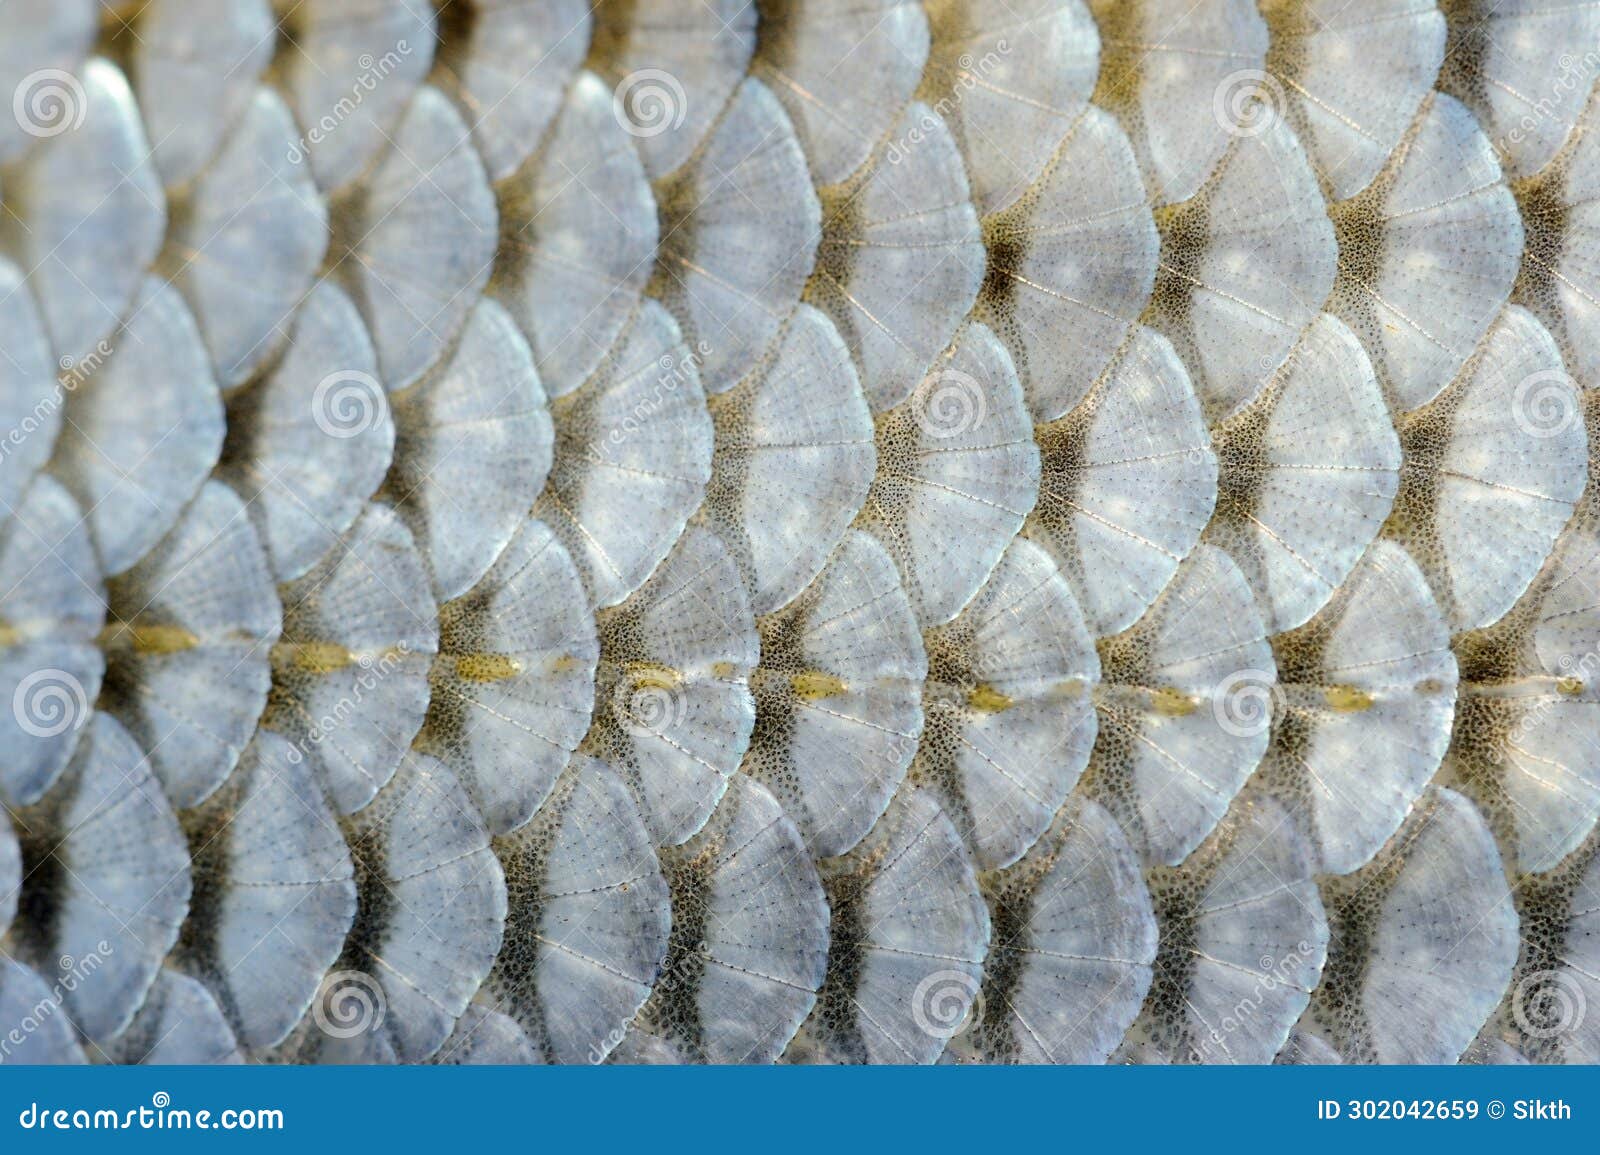 https://thumbs.dreamstime.com/z/fish-scales-macro-intricate-details-fish-scales-unique-patterns-textures-colors-form-protective-outer-layer-302042659.jpg